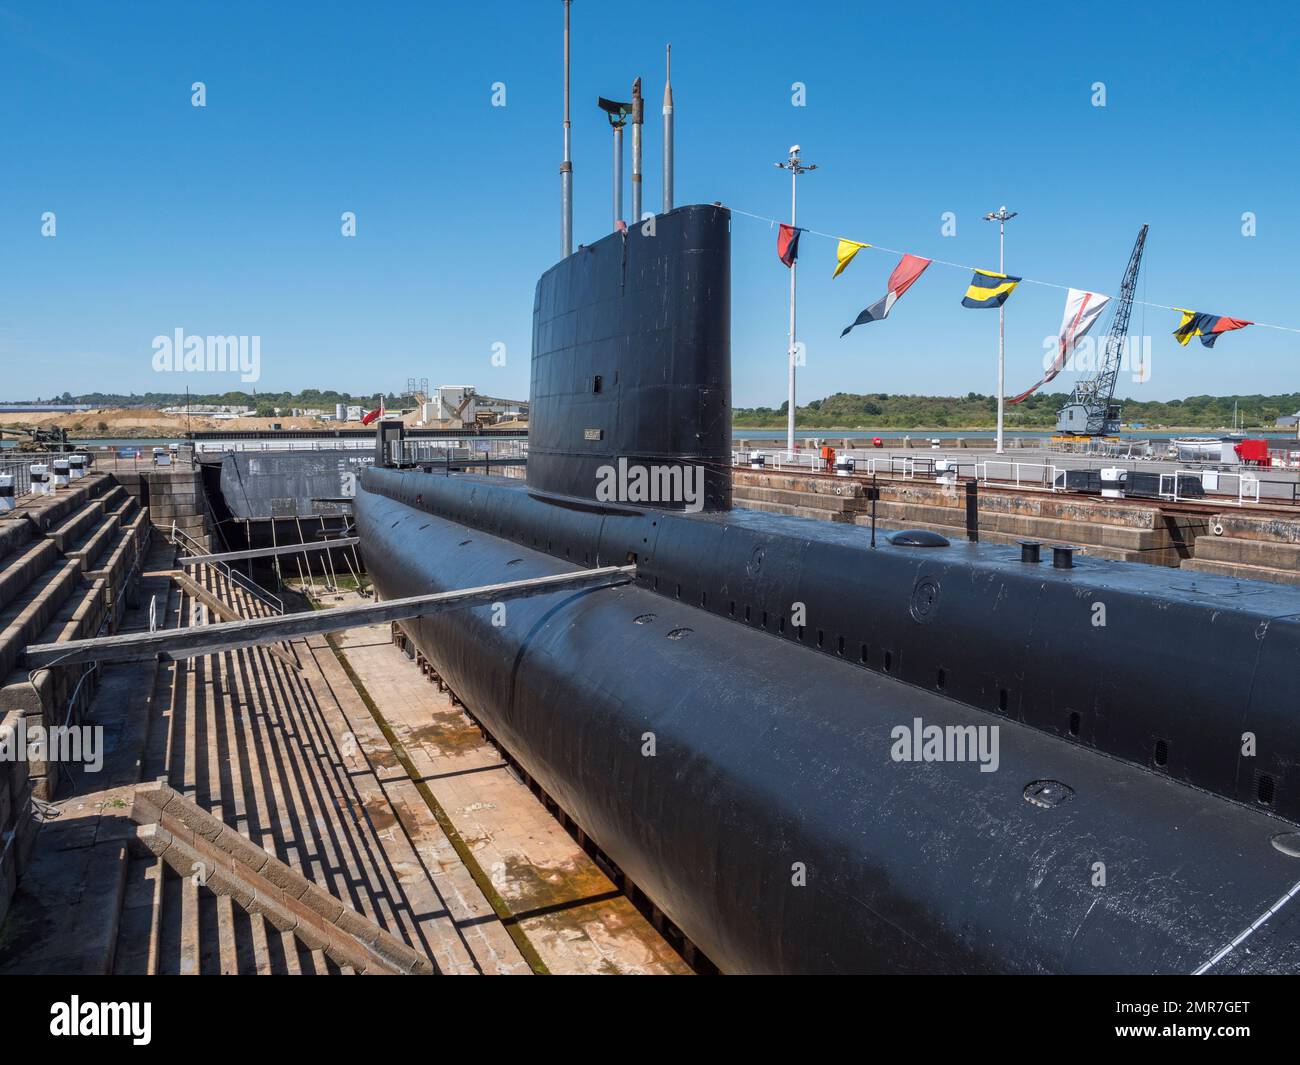 Exterior view of the submarine HMS Ocelot in the Historic Dockyard Chatham, Kent, UK. Stock Photo